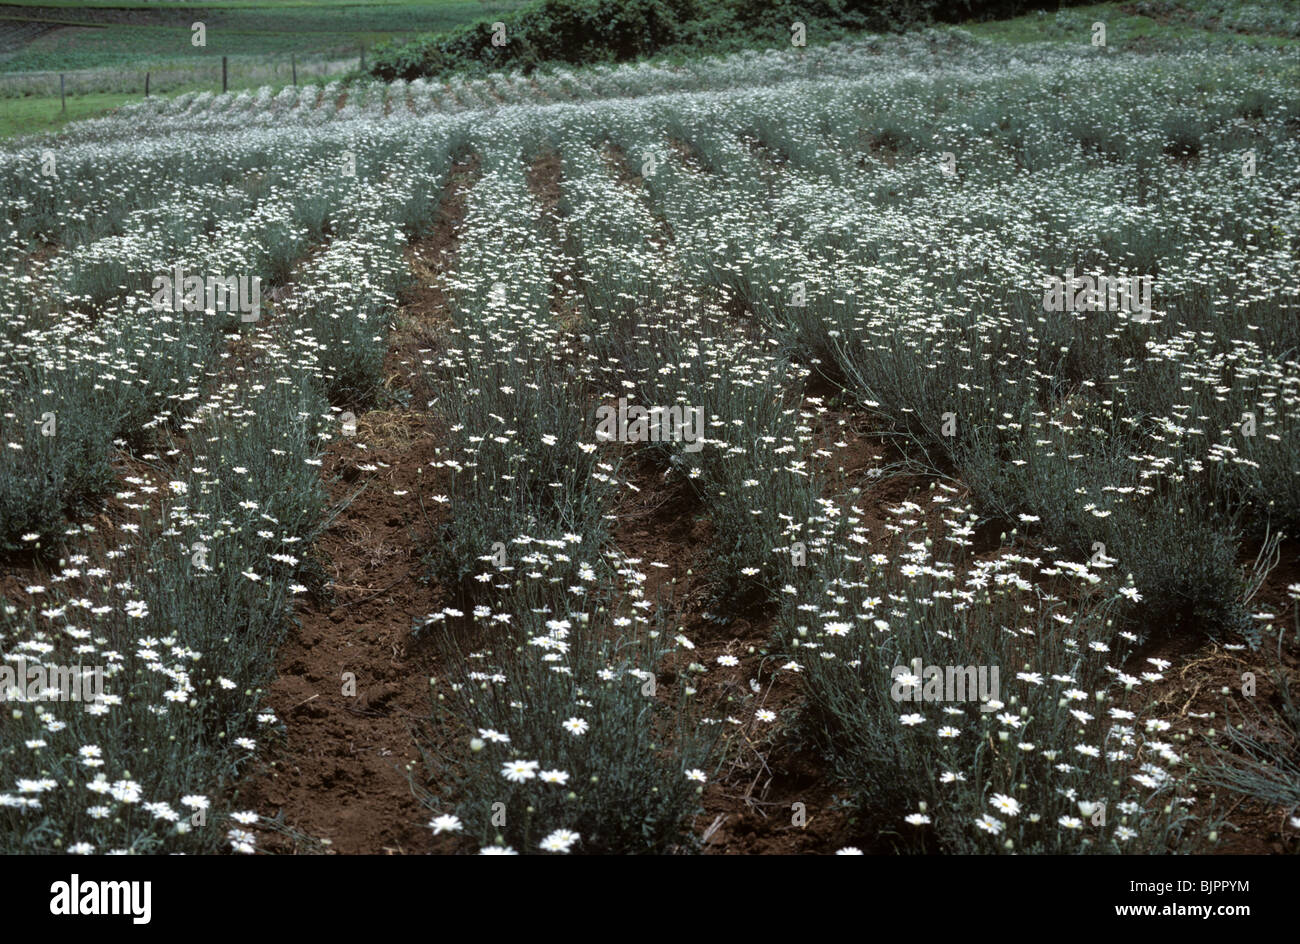 A flowering crop of pyrethrum used as a natural insecticide, Kenya Stock Photo